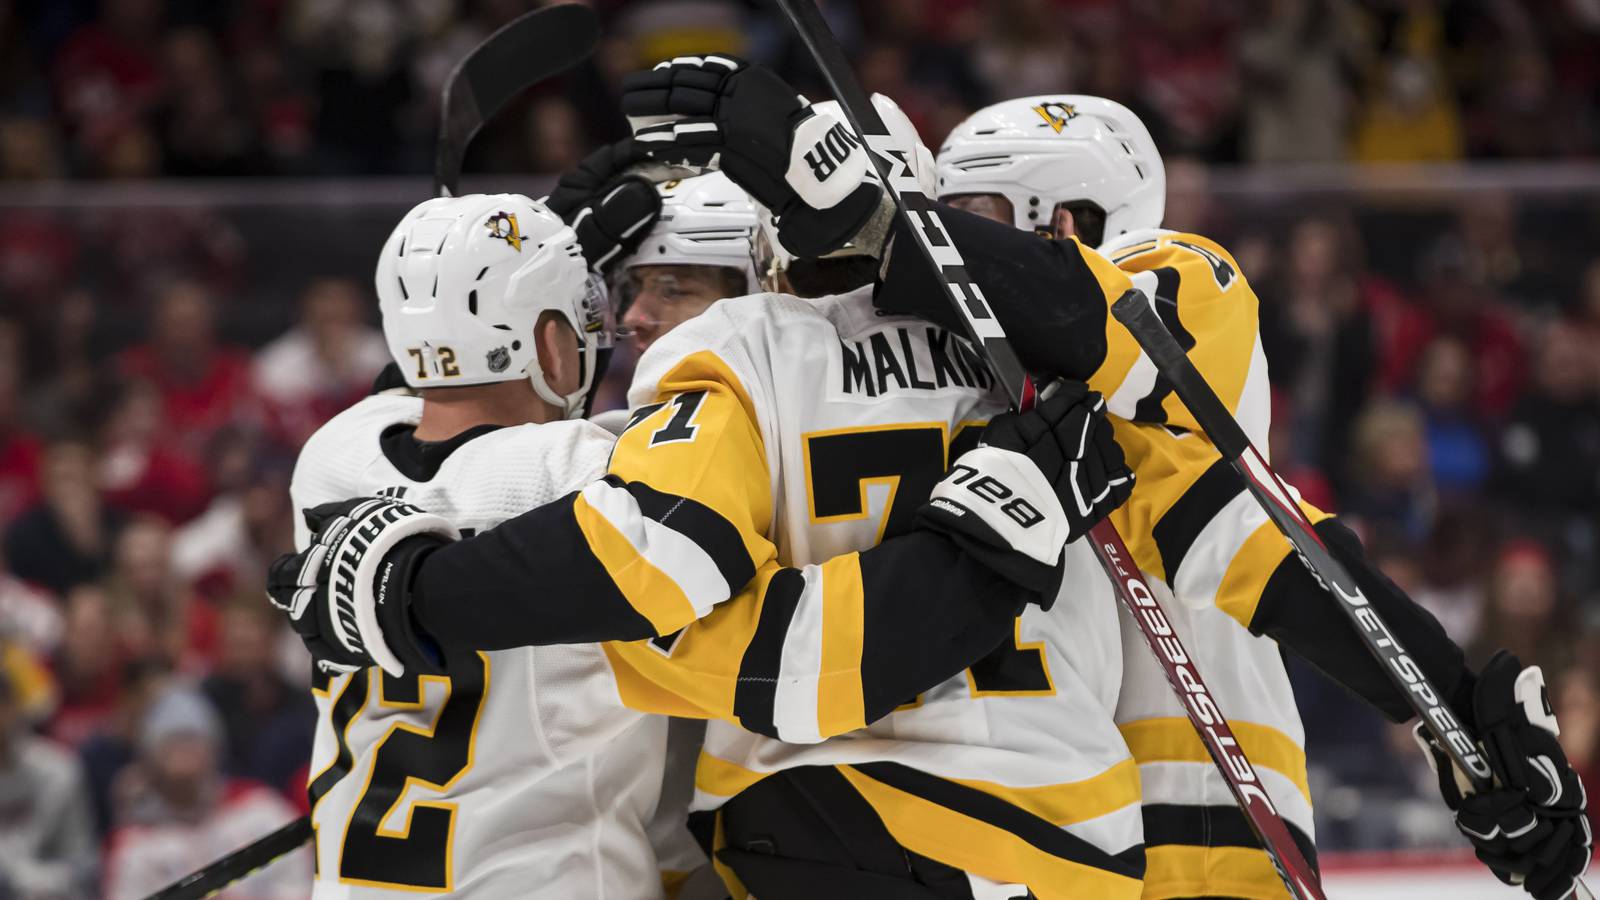 Penguins playoffs 2020: NHL releases full schedule for exhibition games, first round – WPXI